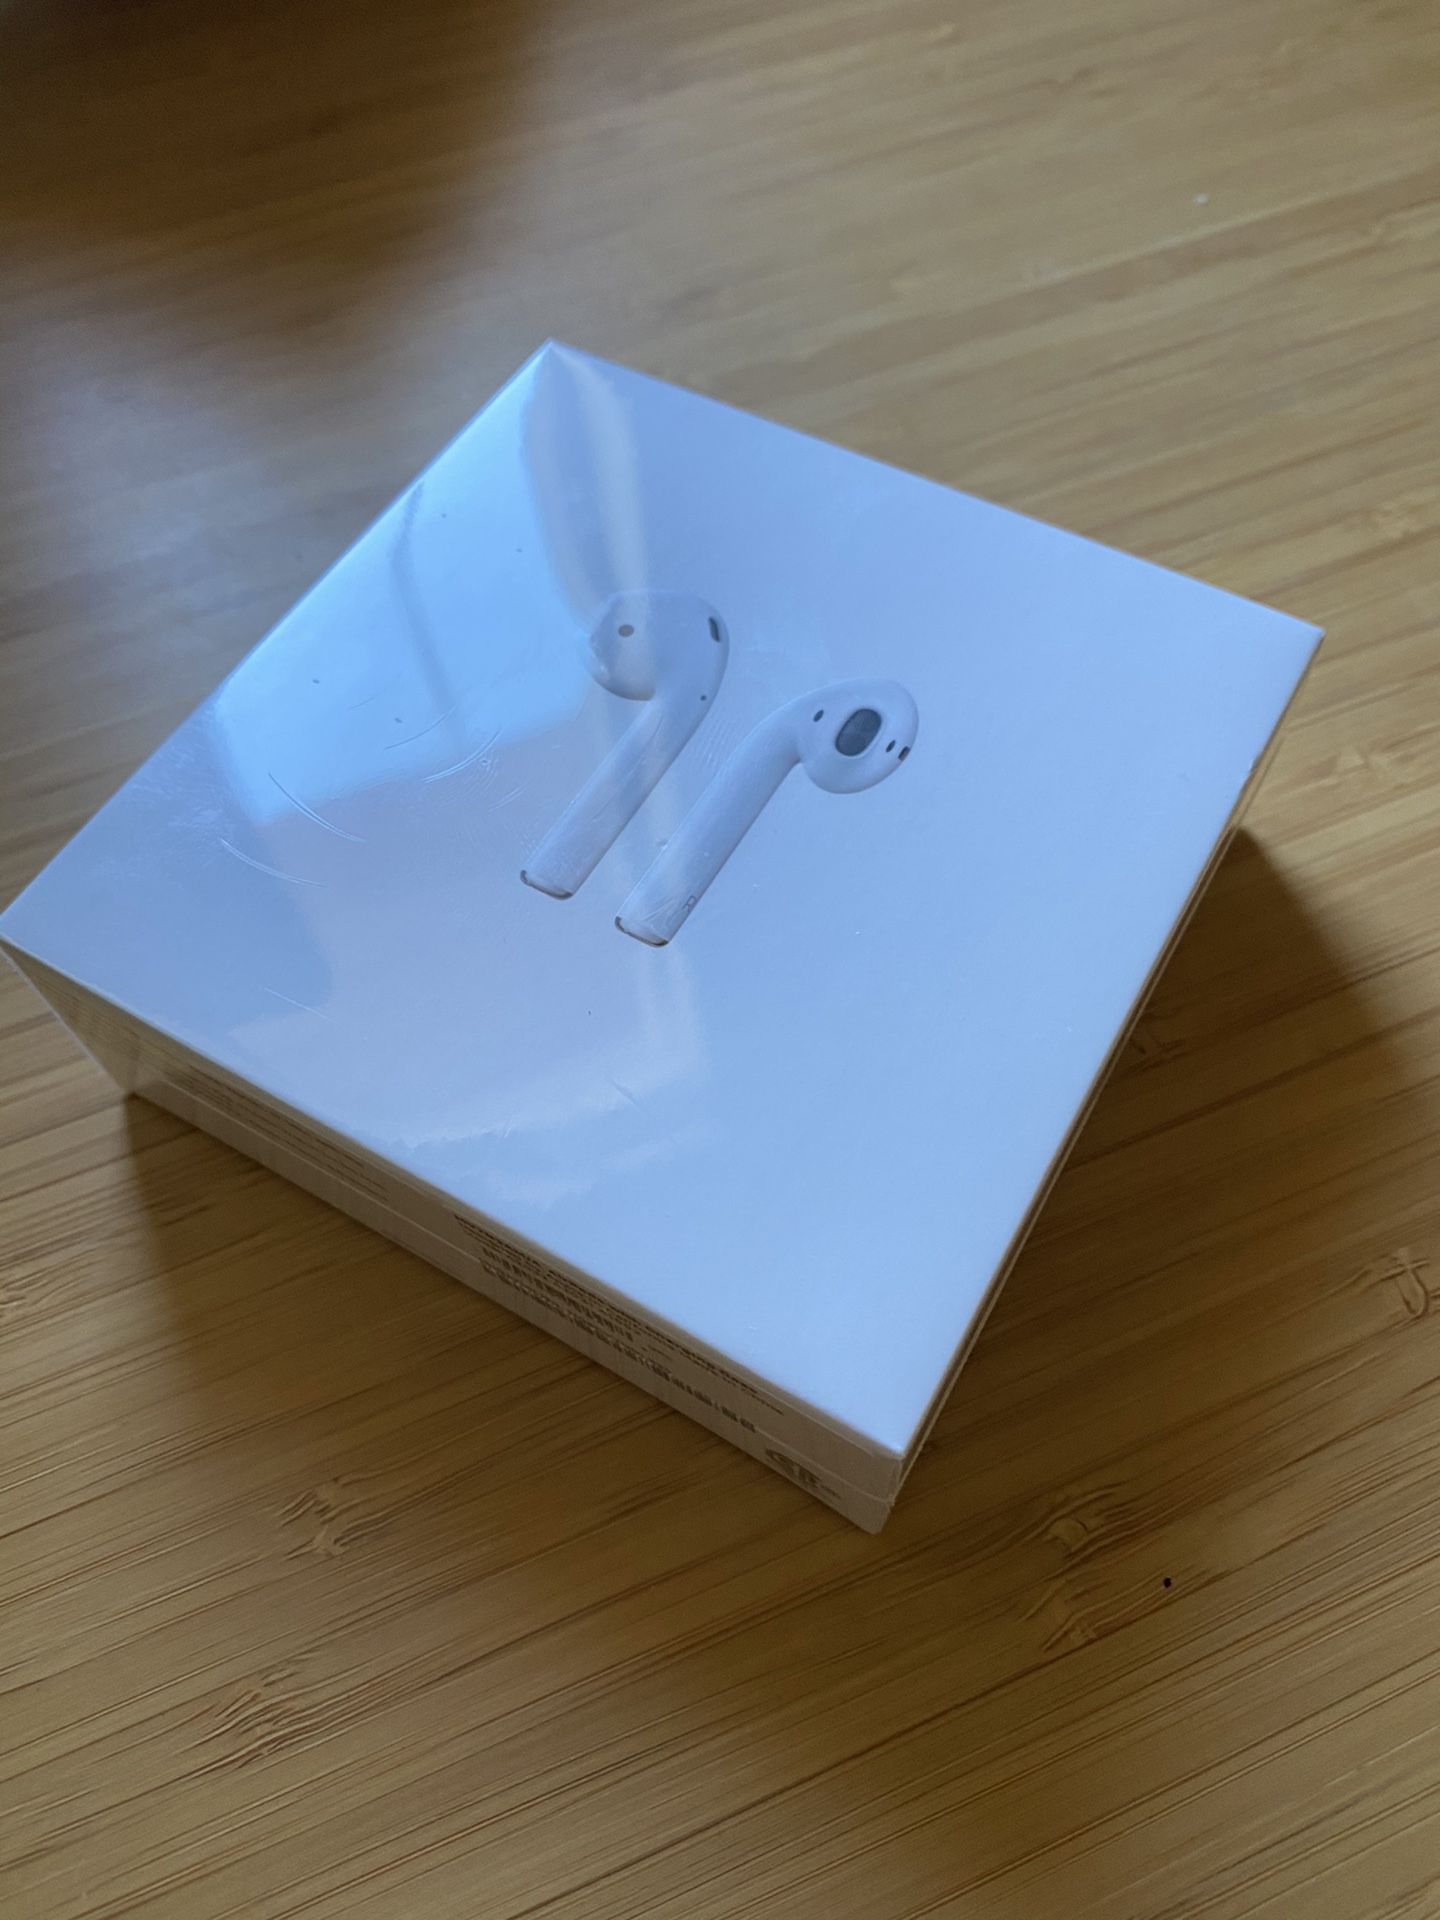 Apple AirPods sealed